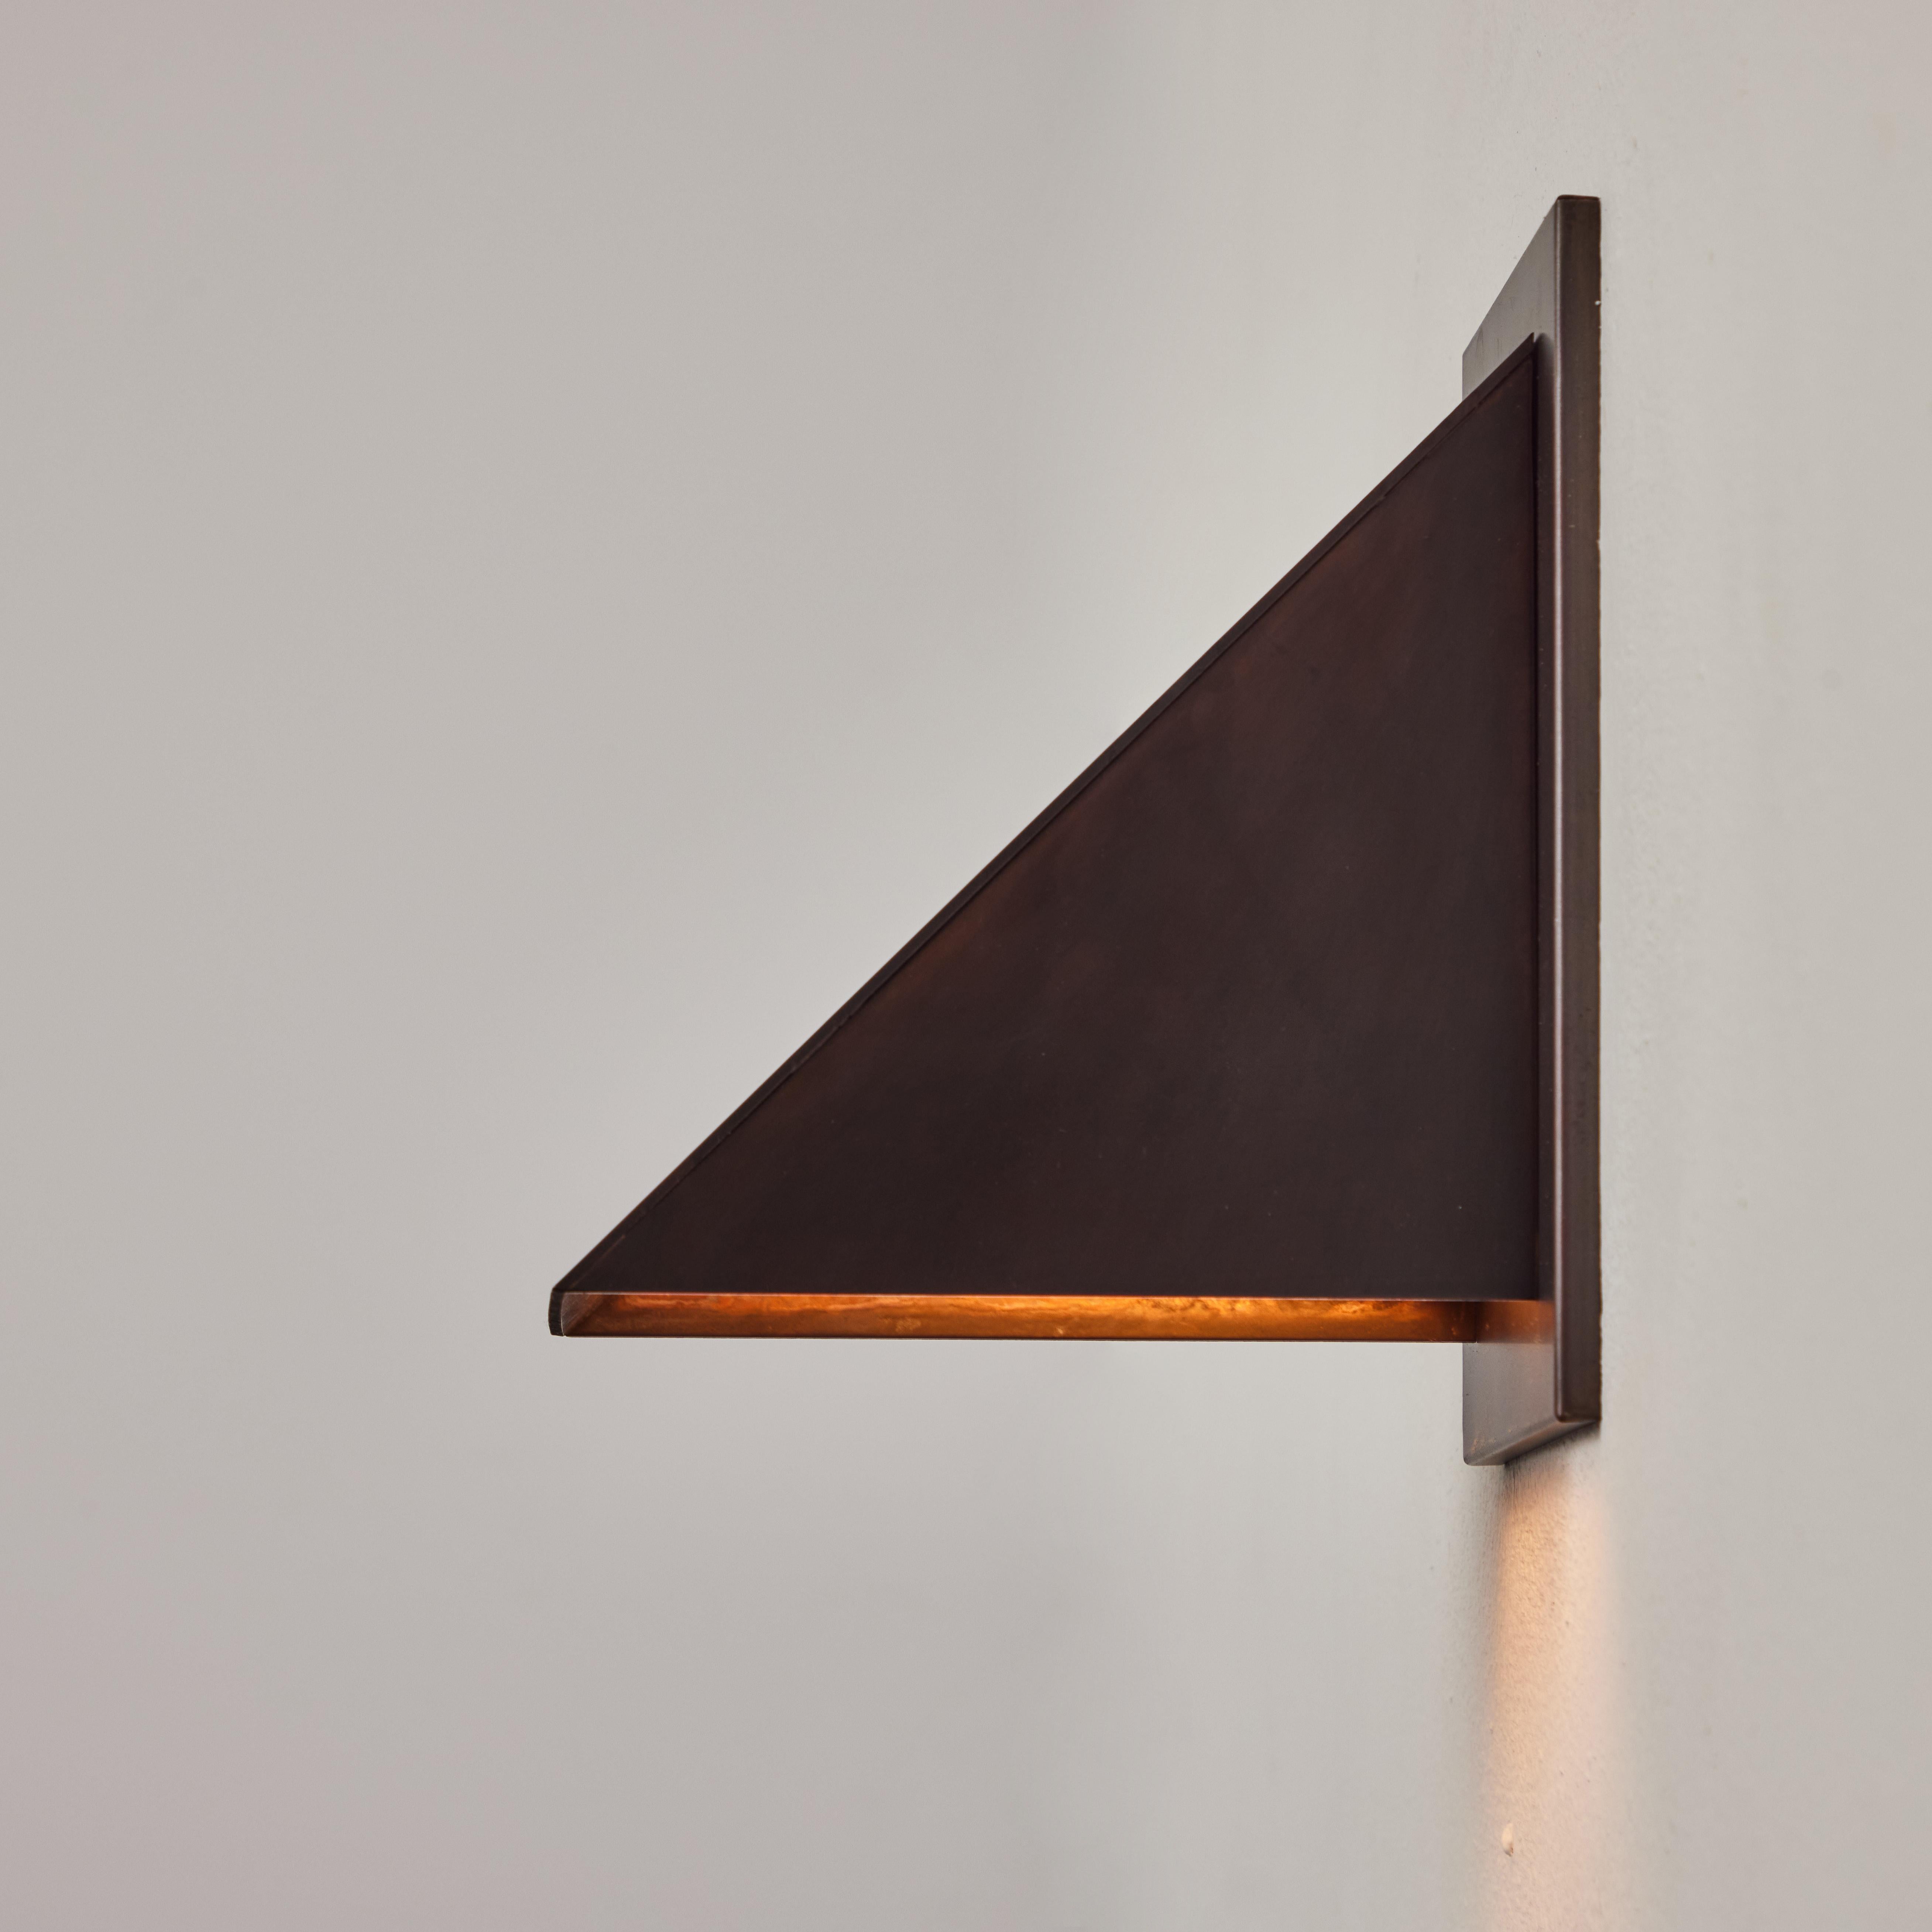 Pair of Jonas Bohlin 'Oxid' Dark Brown Patinated Outdoor Wall Lights for Örsjö. Executed in richly patinated metal with an opaline glass diffuser. An incredibly refined and clean geometric design that is quintessentially Scandinavian. For indoor or